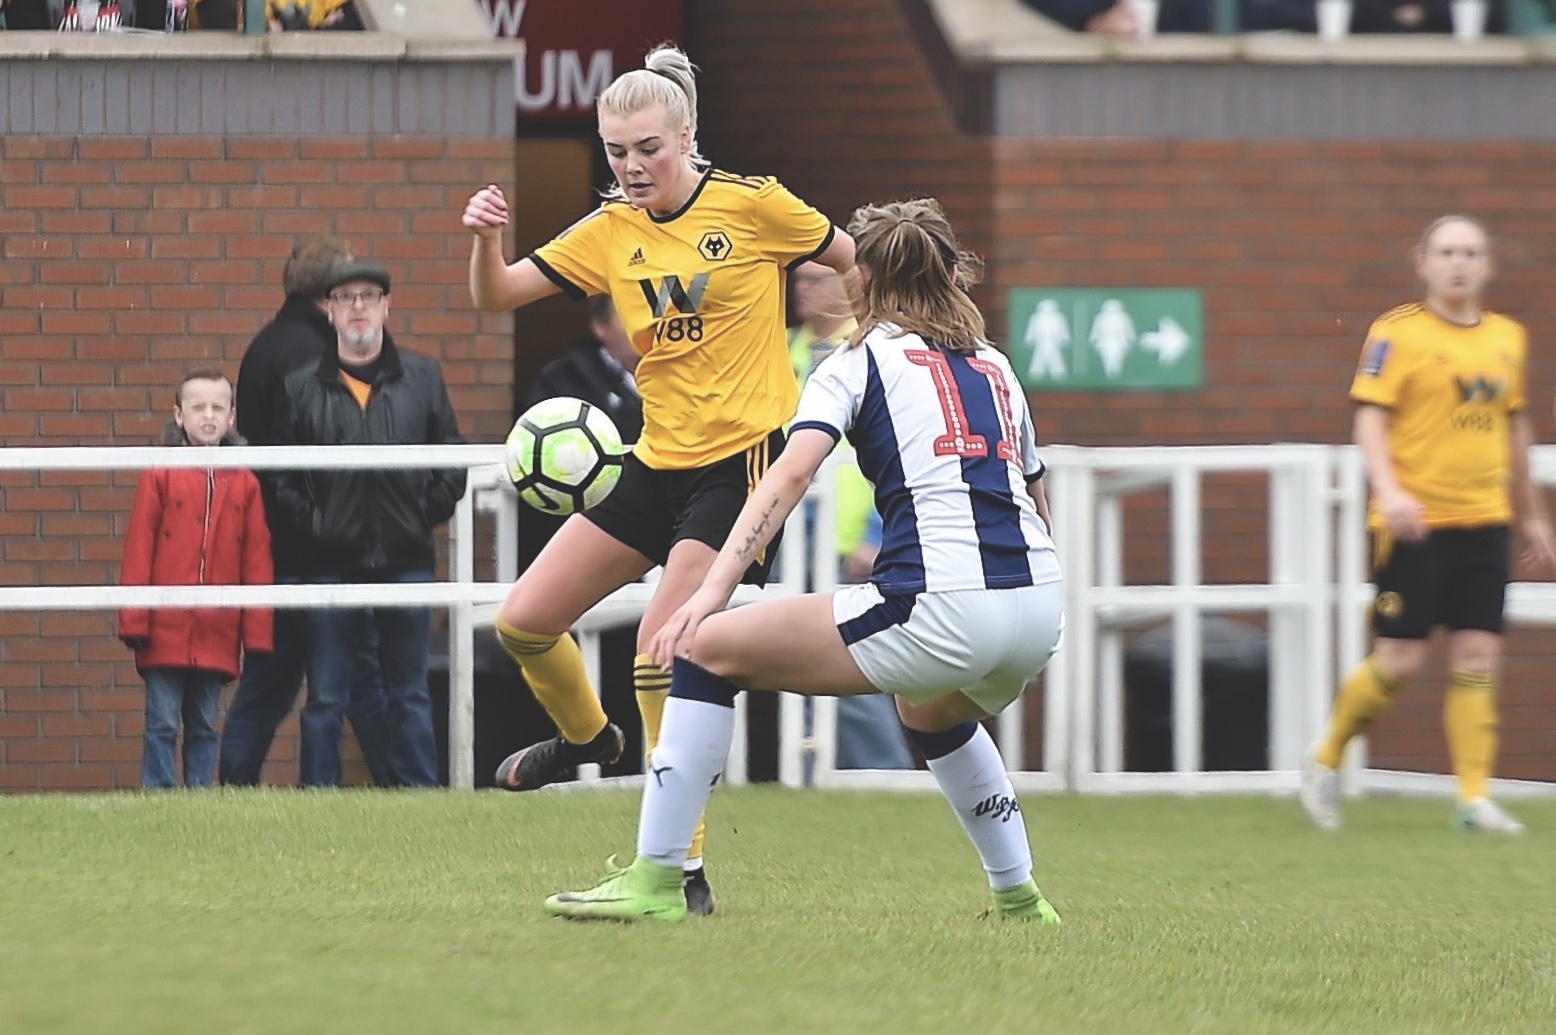 Match Report: Wolves 3-1 West Bromwich Albion. All photos by Adam Nunn